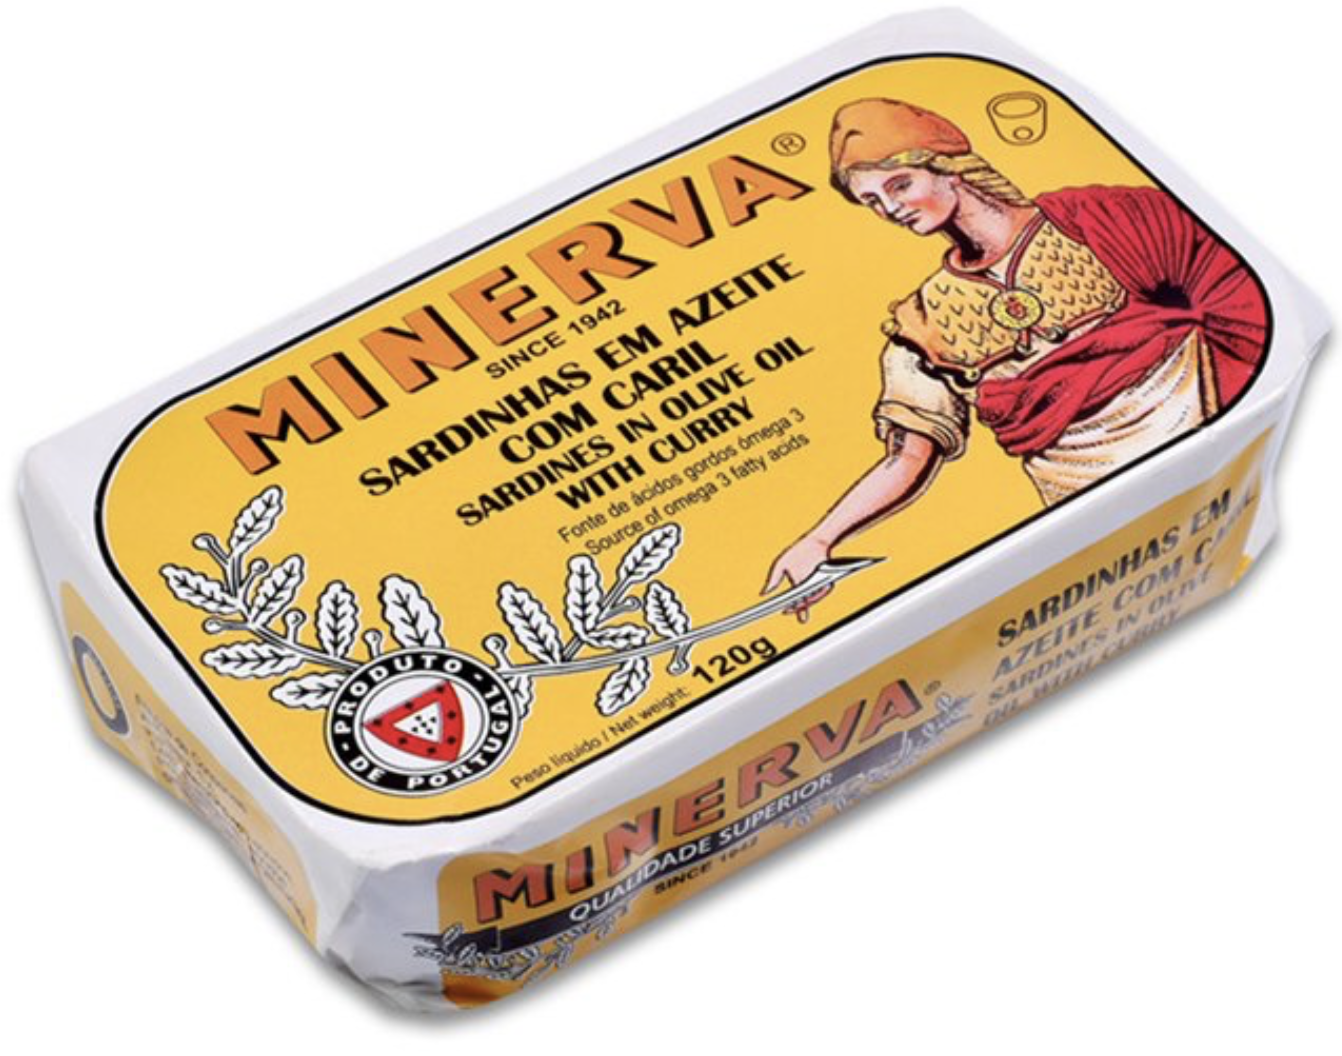 Minerva Sardines in Olive Oil with Curry